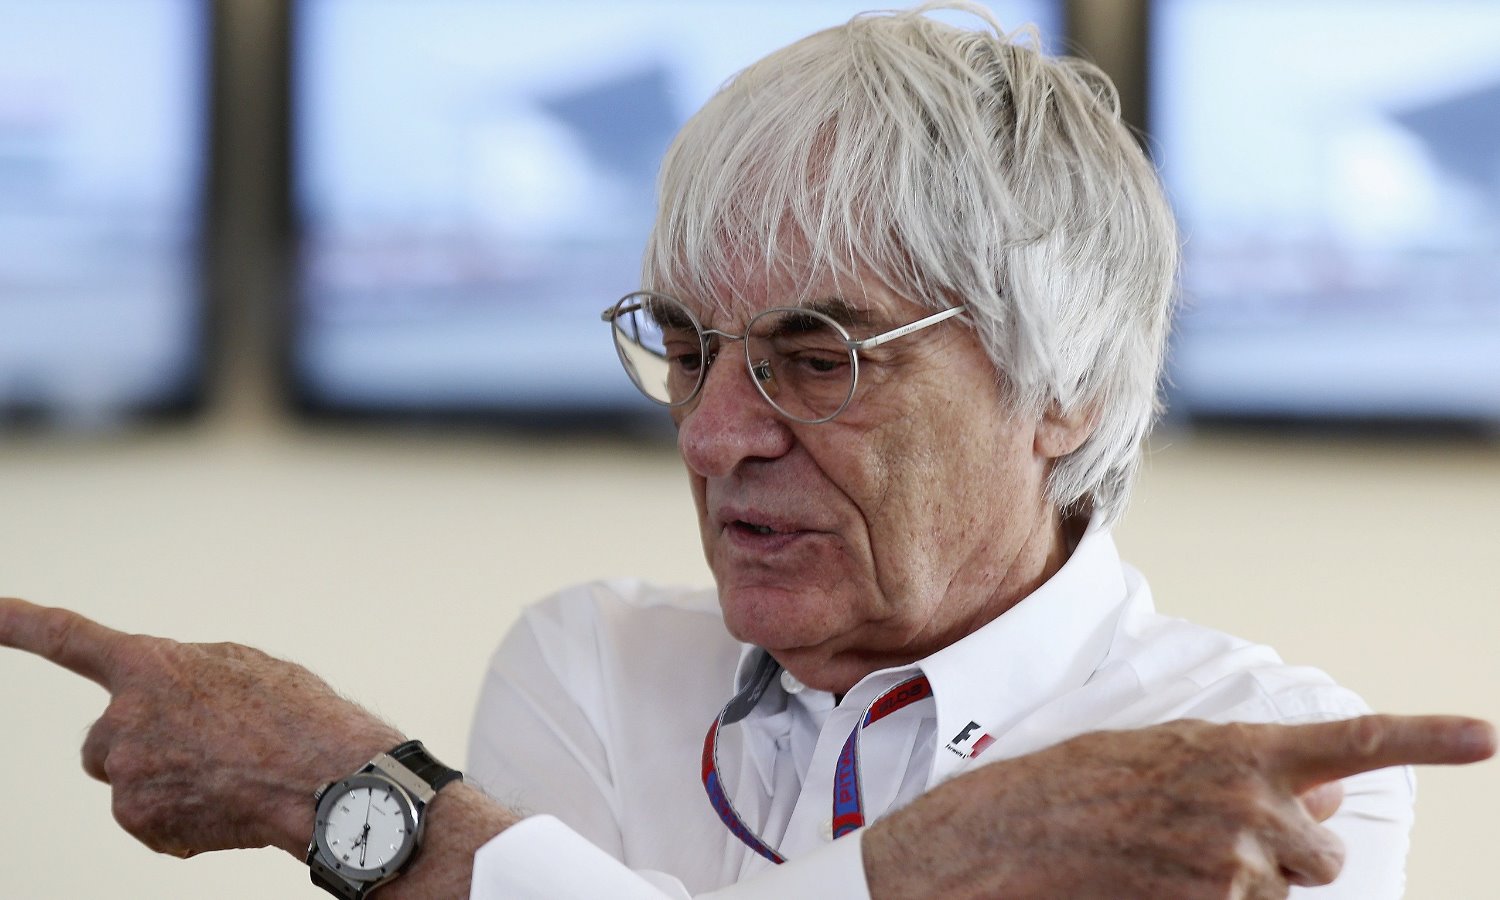 All Ecclestone wants is for woman to race in a 'woman's' league. Every other sport in this world has a 'woman's league. Maybe racing isn't a sport.